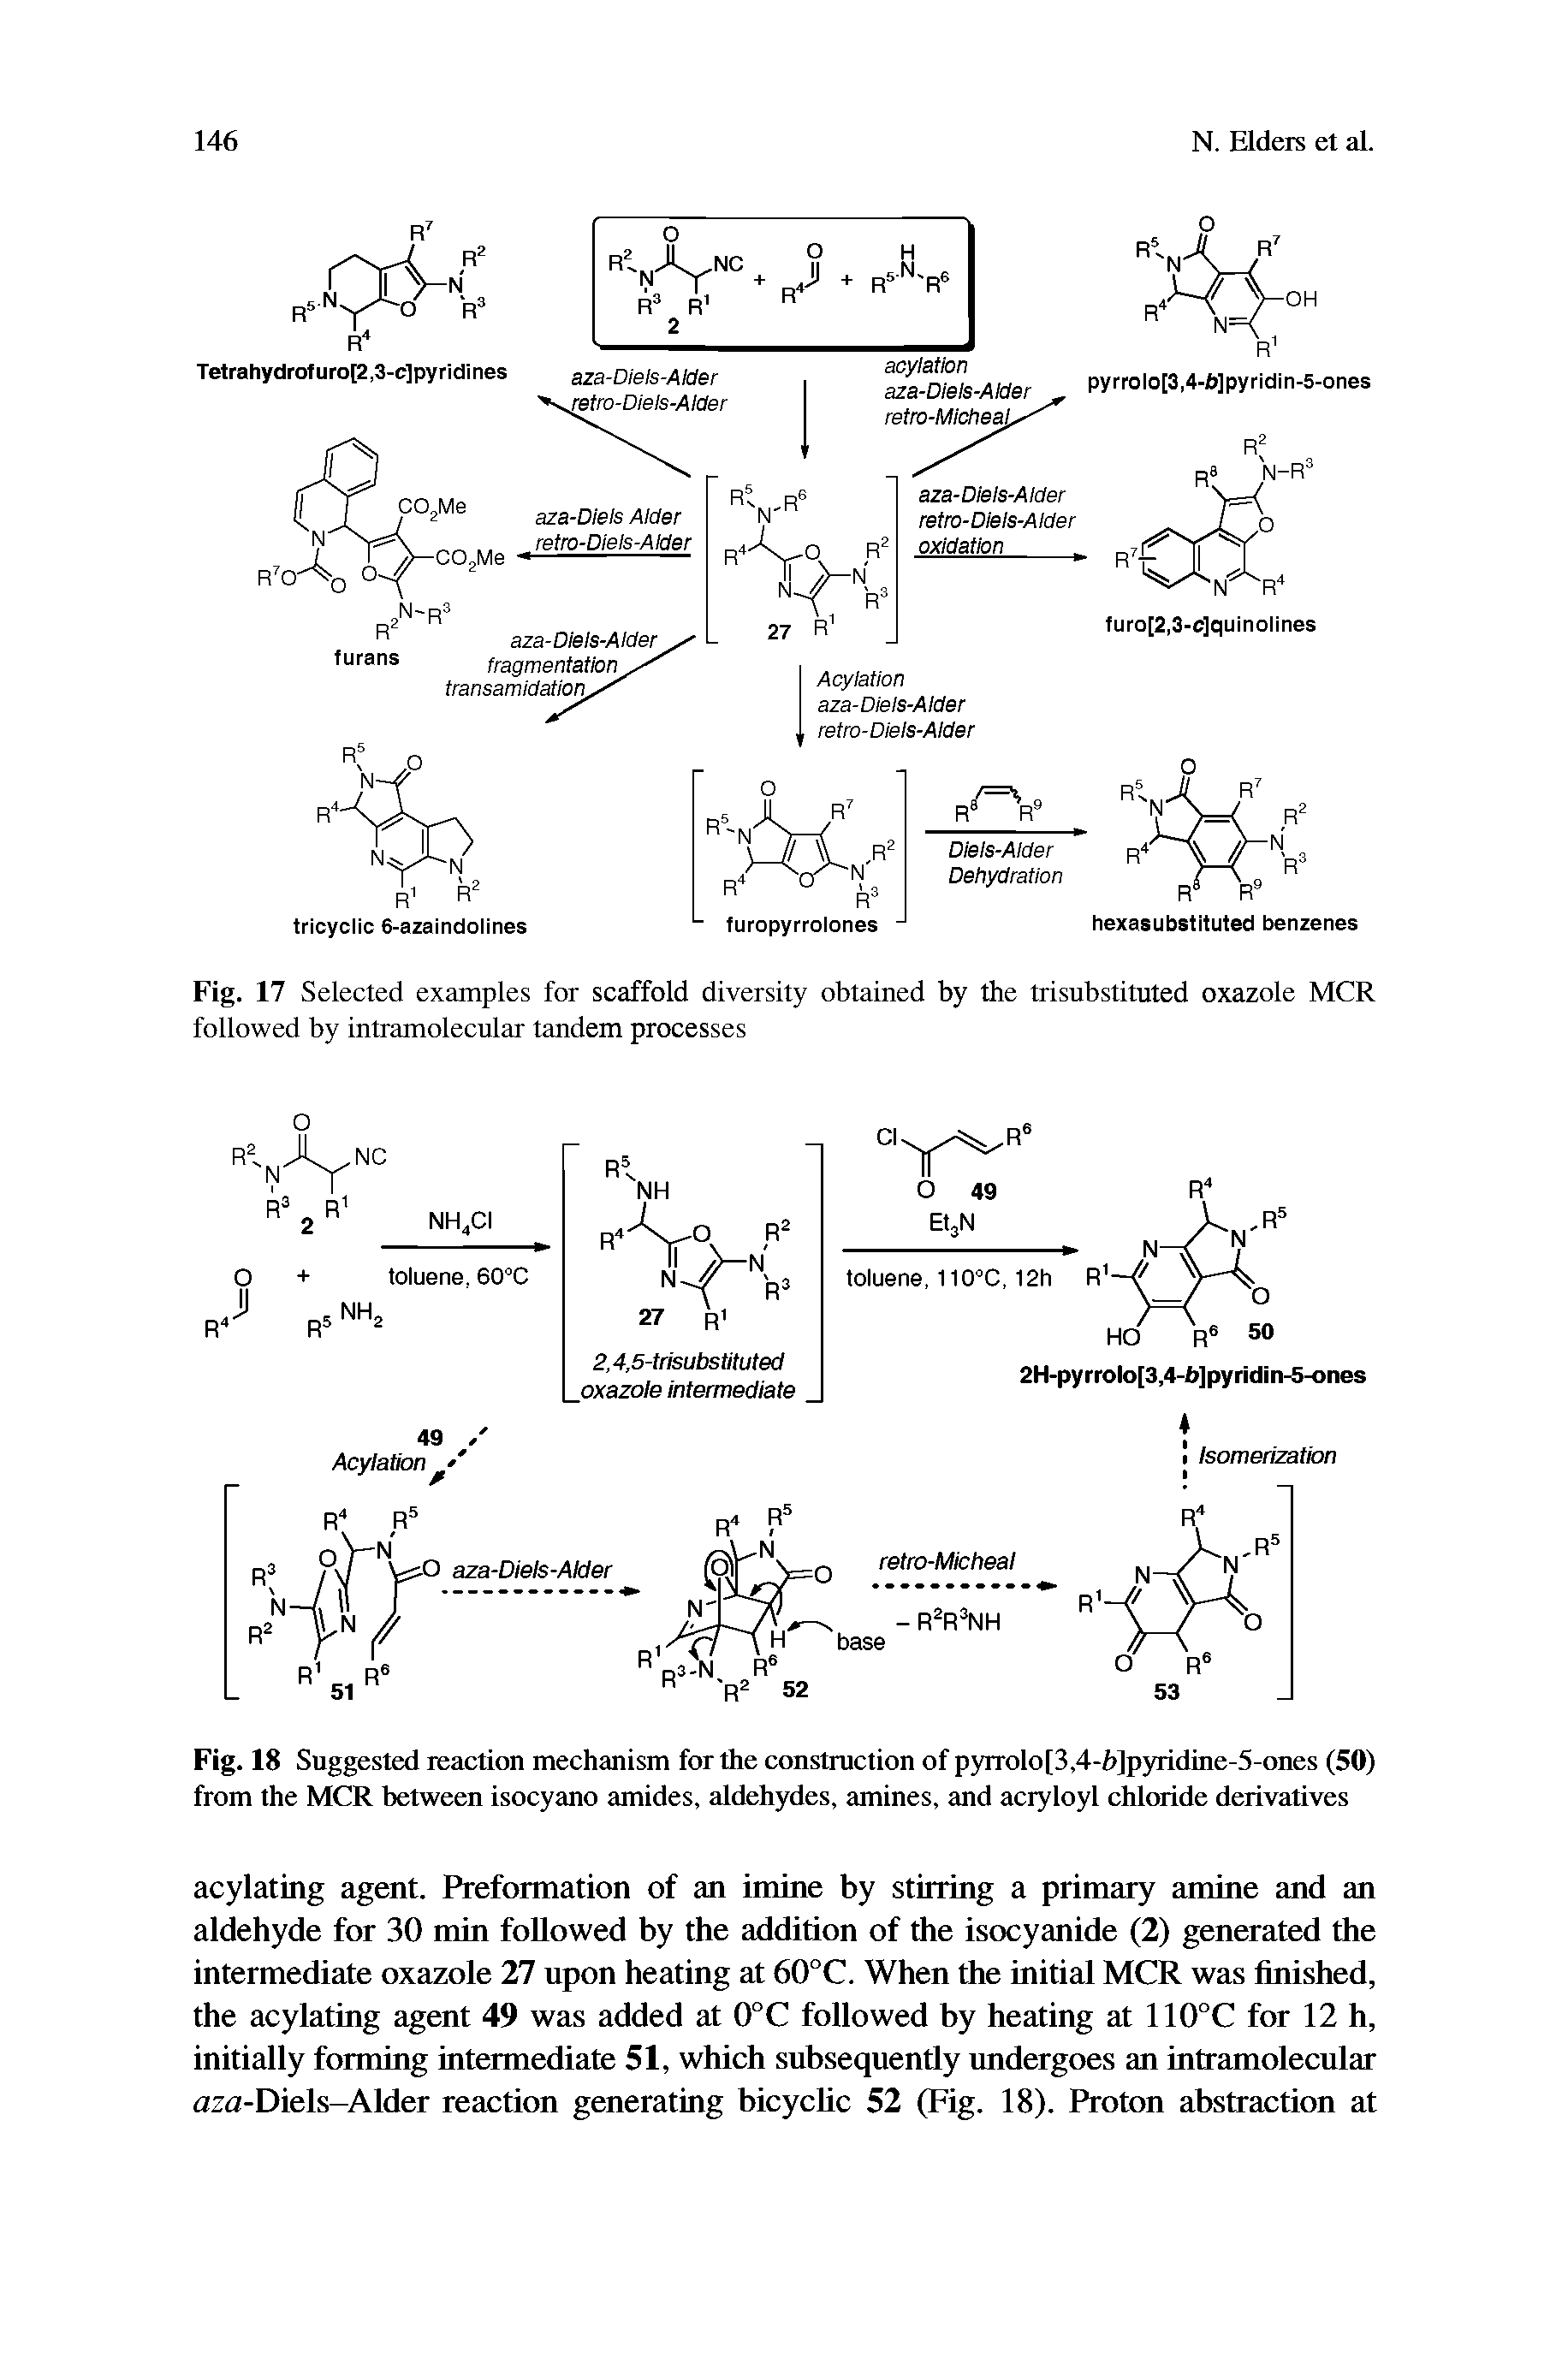 Fig. 18 Suggested reaction mechanism for the construction of pyrrolo[3,4-h]pyridme-5-ones (50) from the MCR between isocyano amides, aldehydes, amines, and acryloyl chloride derivatives...